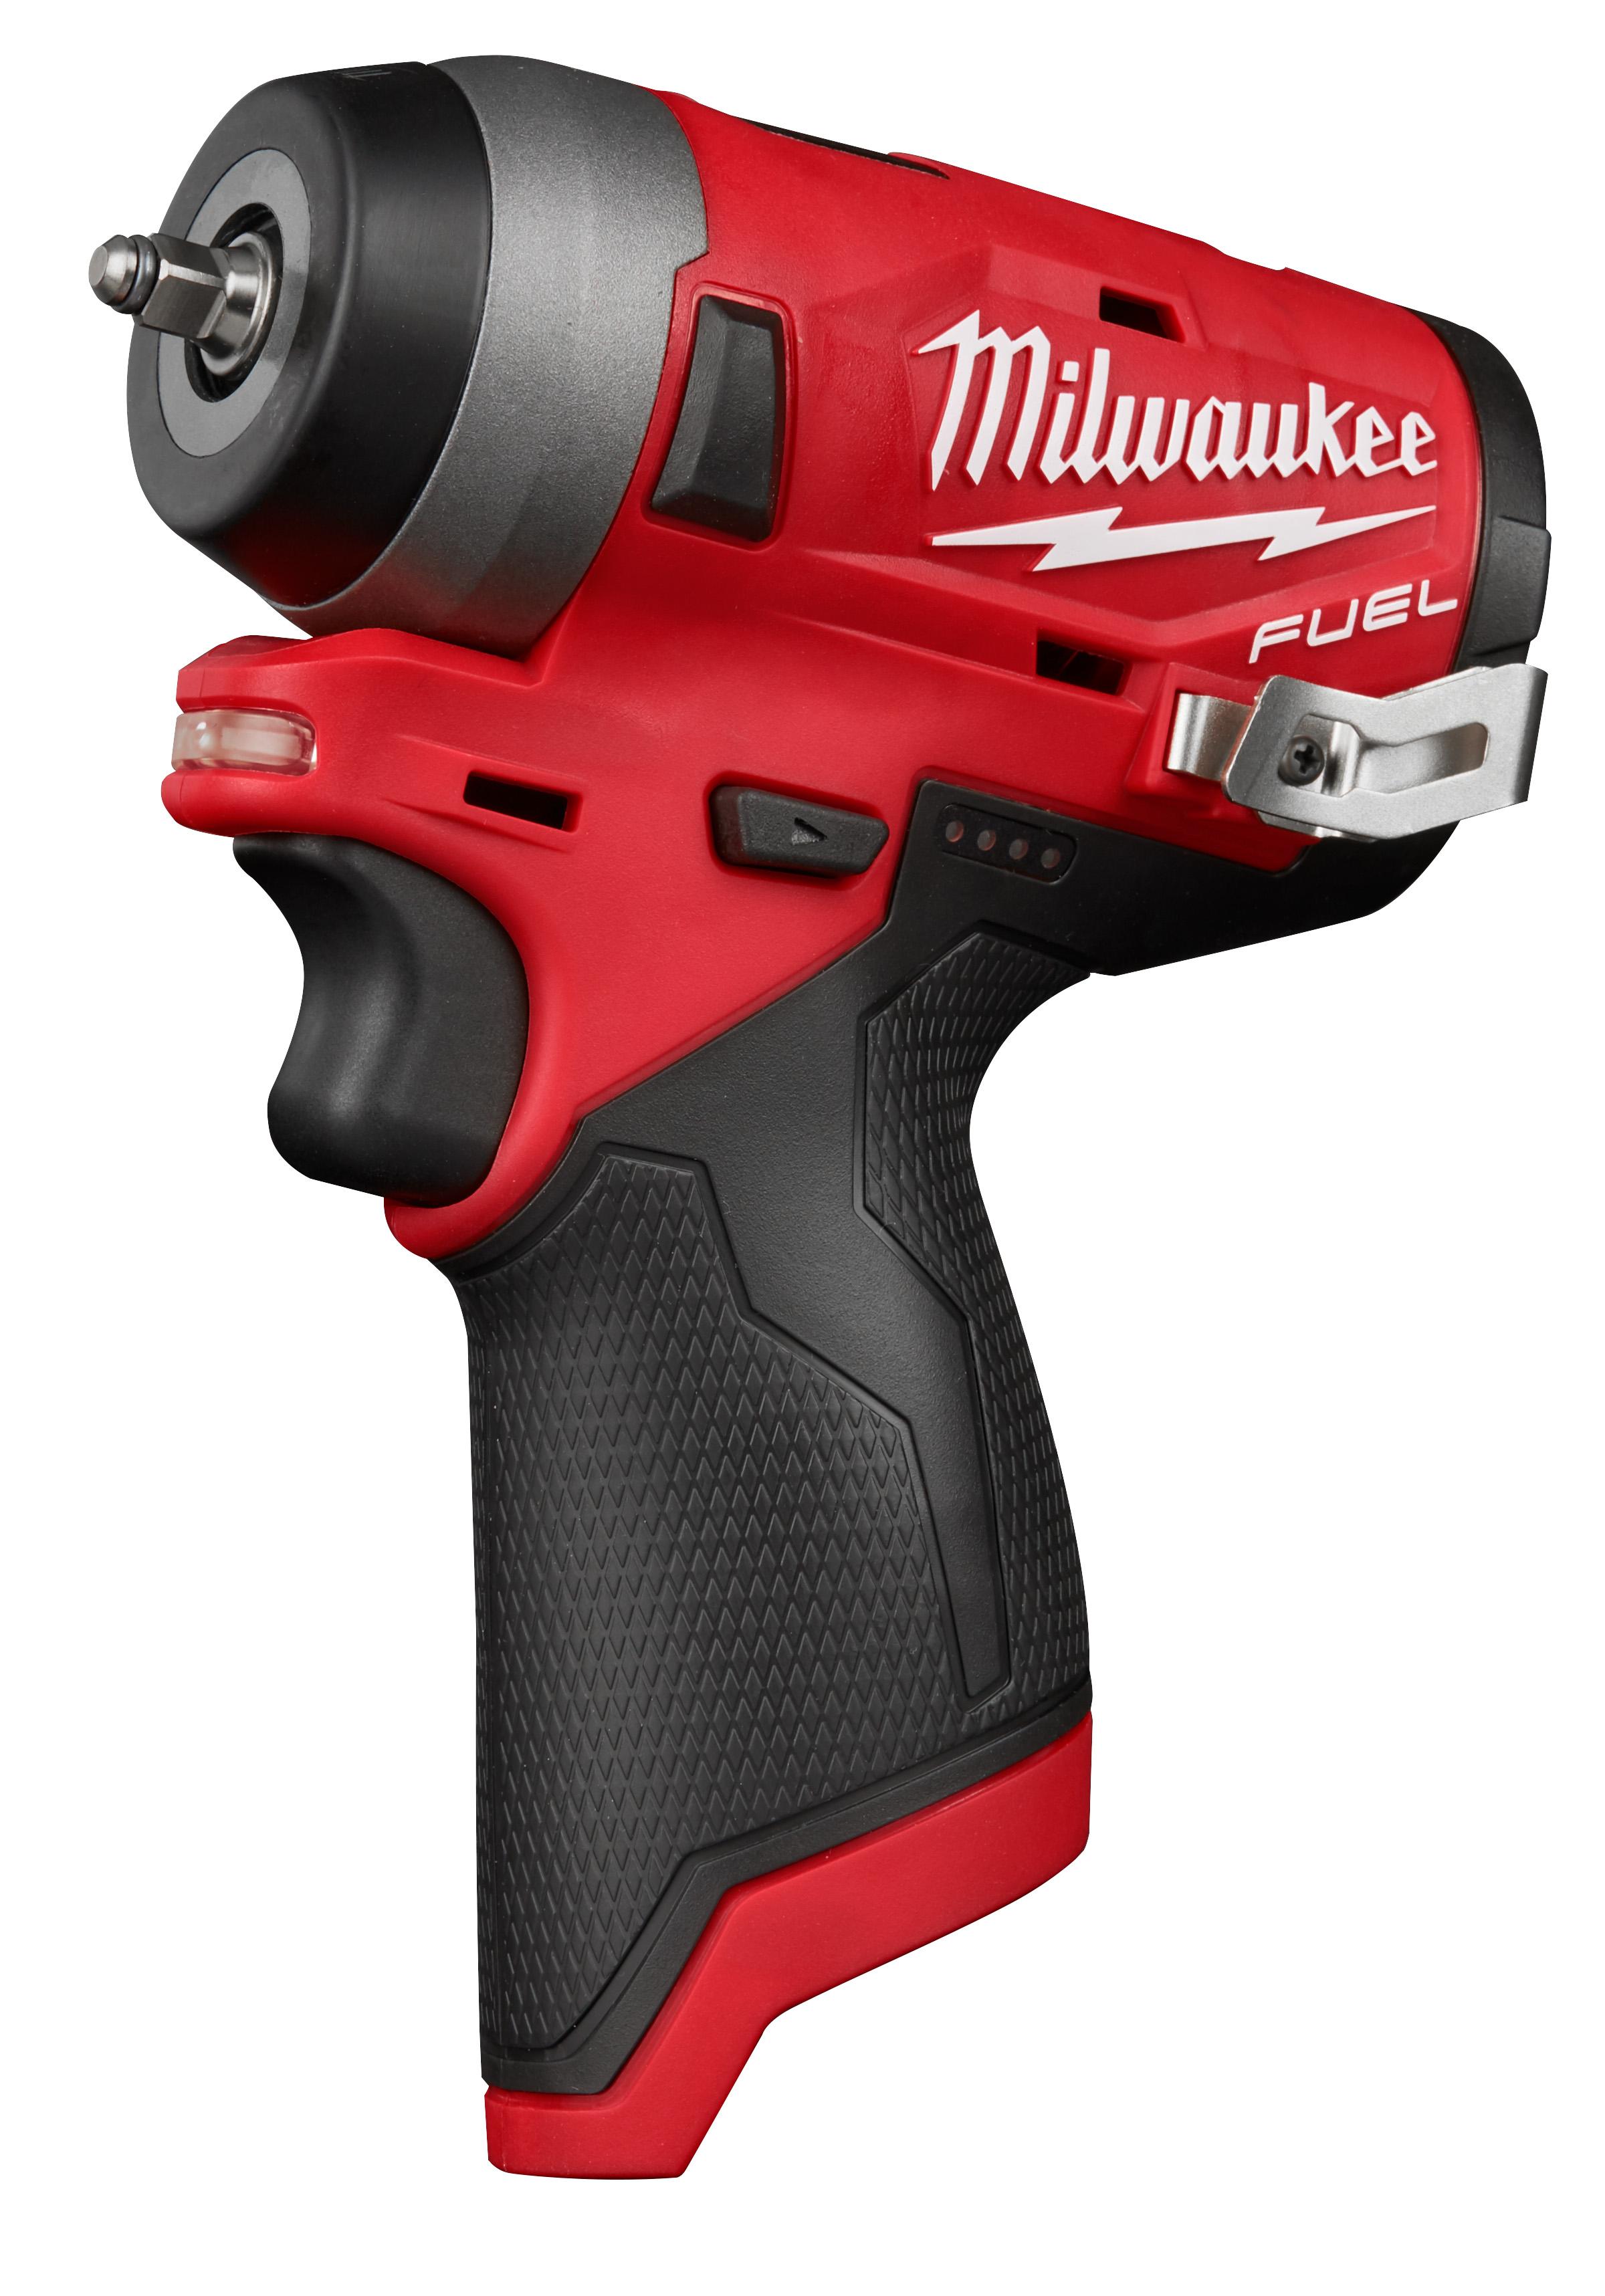 Milwaukee® M12™ 2463-20 Compact Cordless Impact Wrench With Friction Ring, 3/8 in Straight Drive, 3300 bpm, 100 ft-lb Torque, 12 VDC, 6-1/2 in OAL